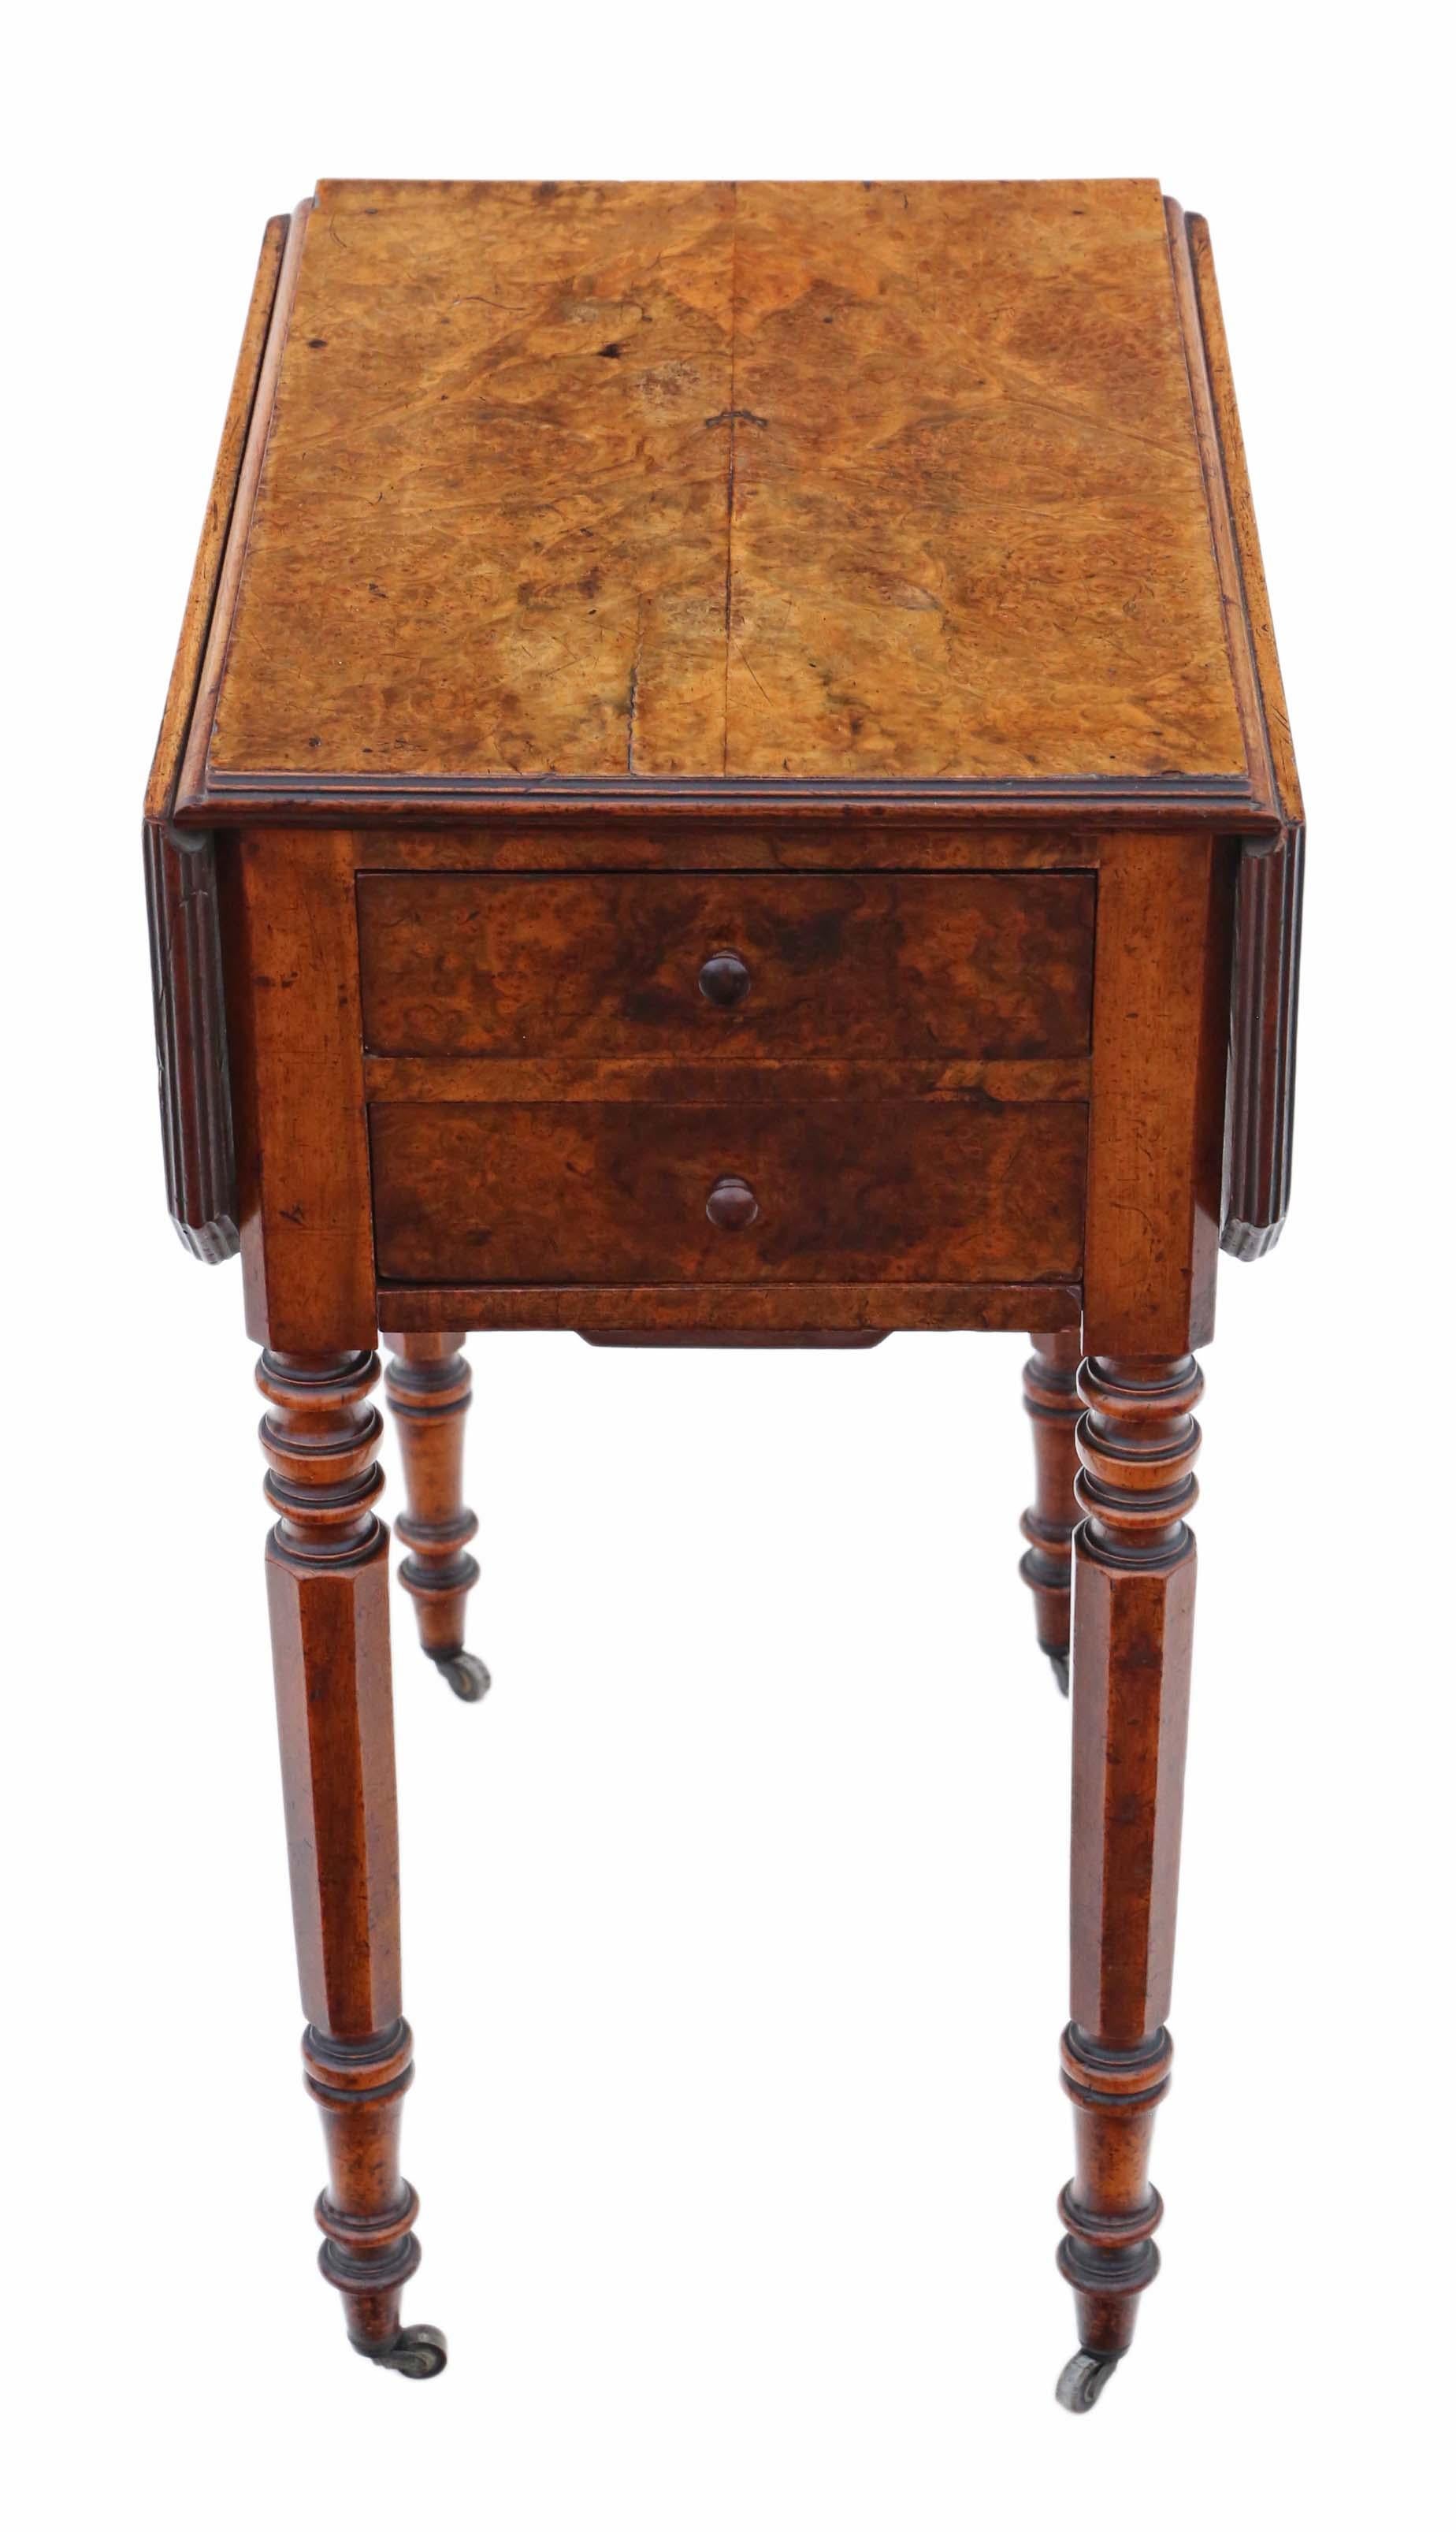 Antique fine quality Victorian 19th Century C1880 burr walnut drop leaf work table.

Two drawers to each side and a sewing compartment, all of which slide freely. Beautiful octagonal legs termination in period castors.

No loose joints. Full of